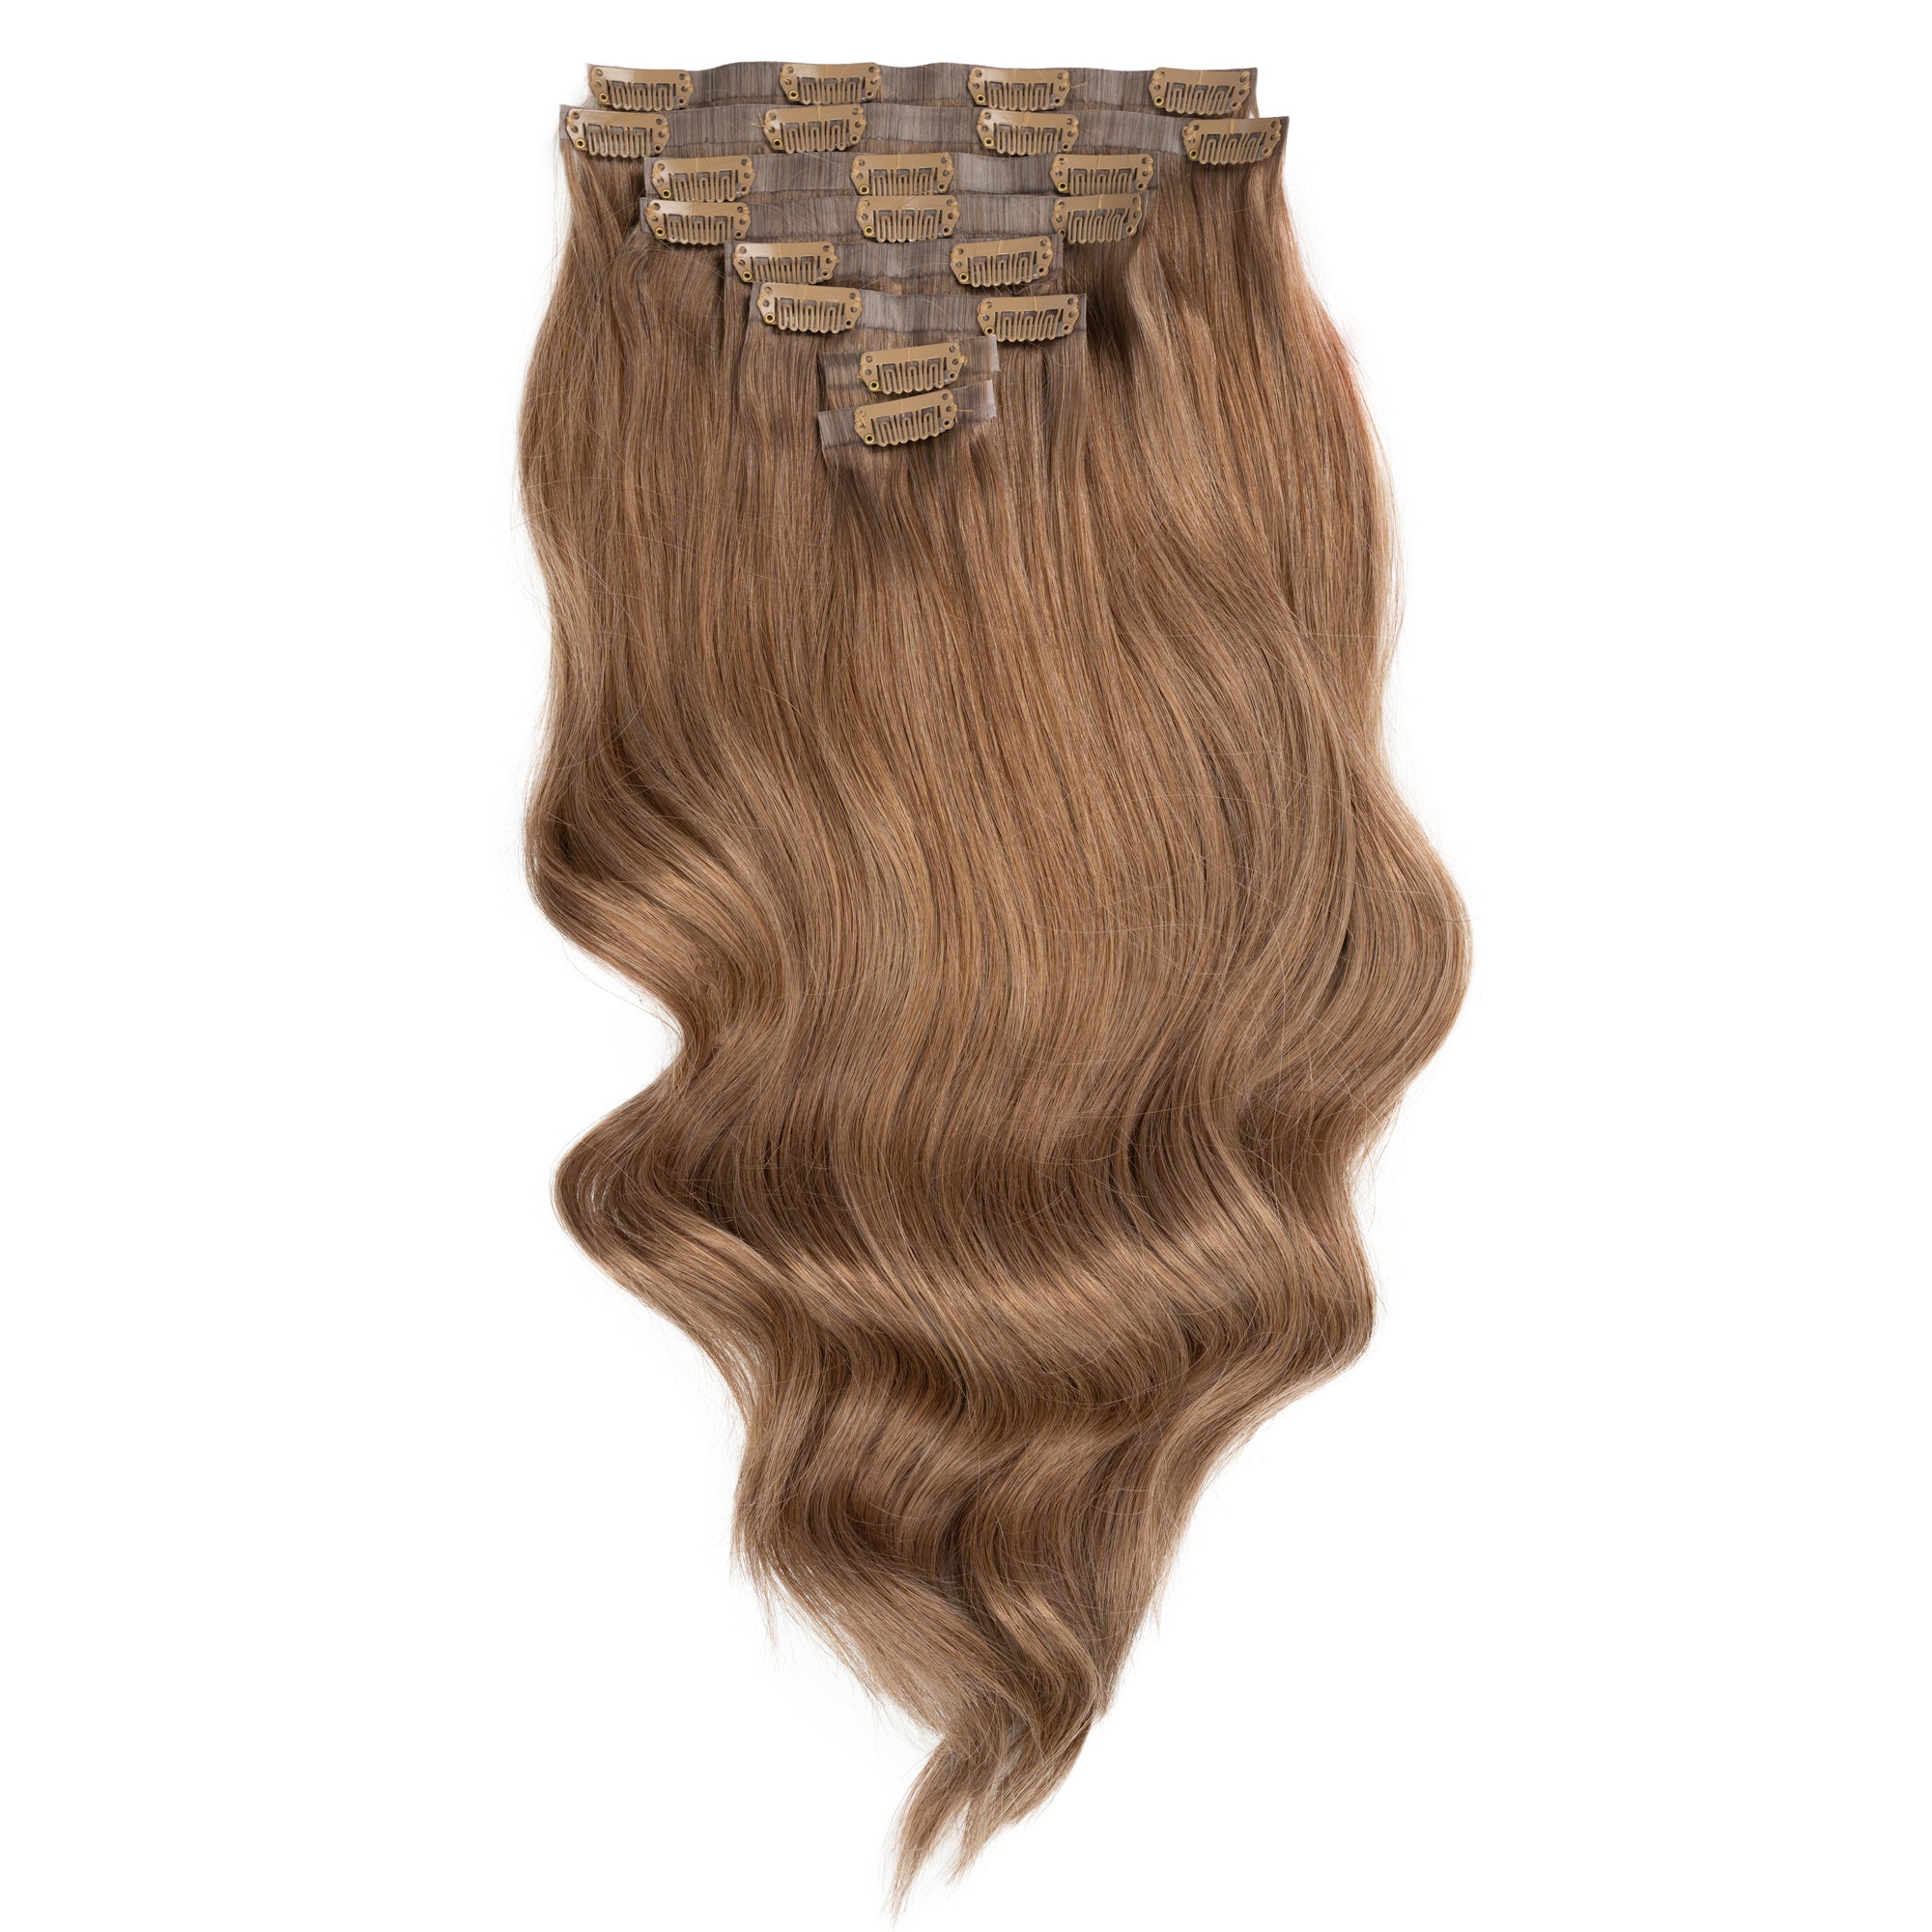 Deluxe Clip In Hair Extensions 20" Colour 10 Dark Blonde - Maneology Hair Extensions